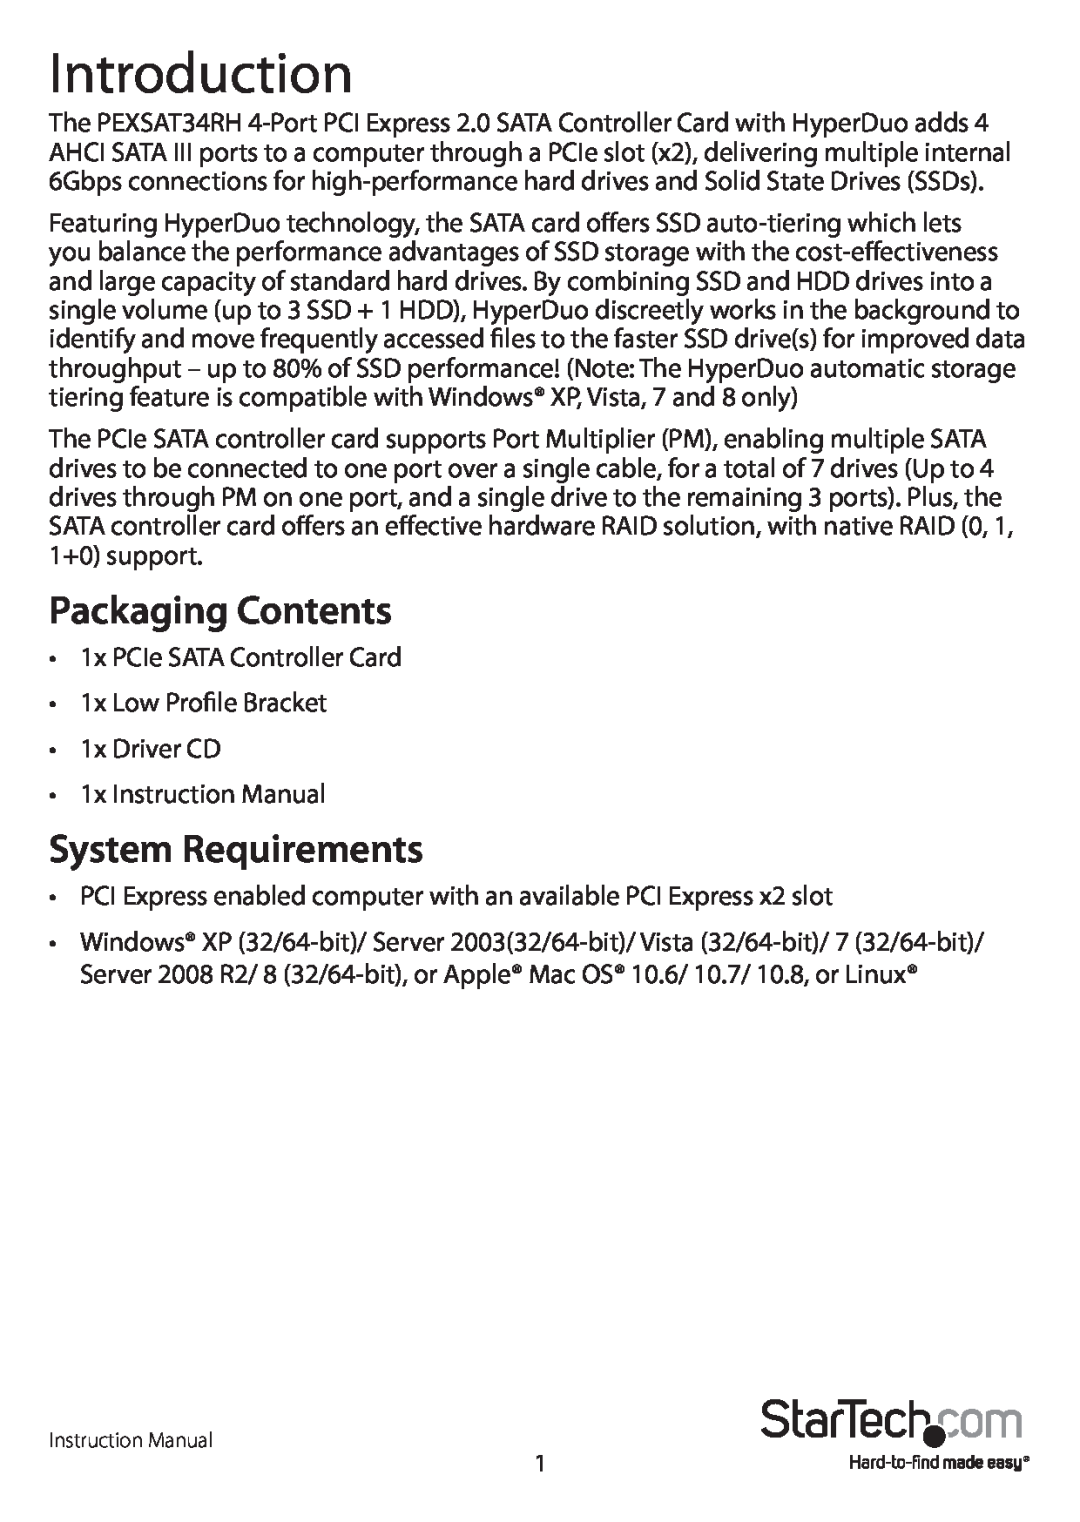 StarTech.com PEXSAT34RH manual Introduction, Packaging Contents, System Requirements 